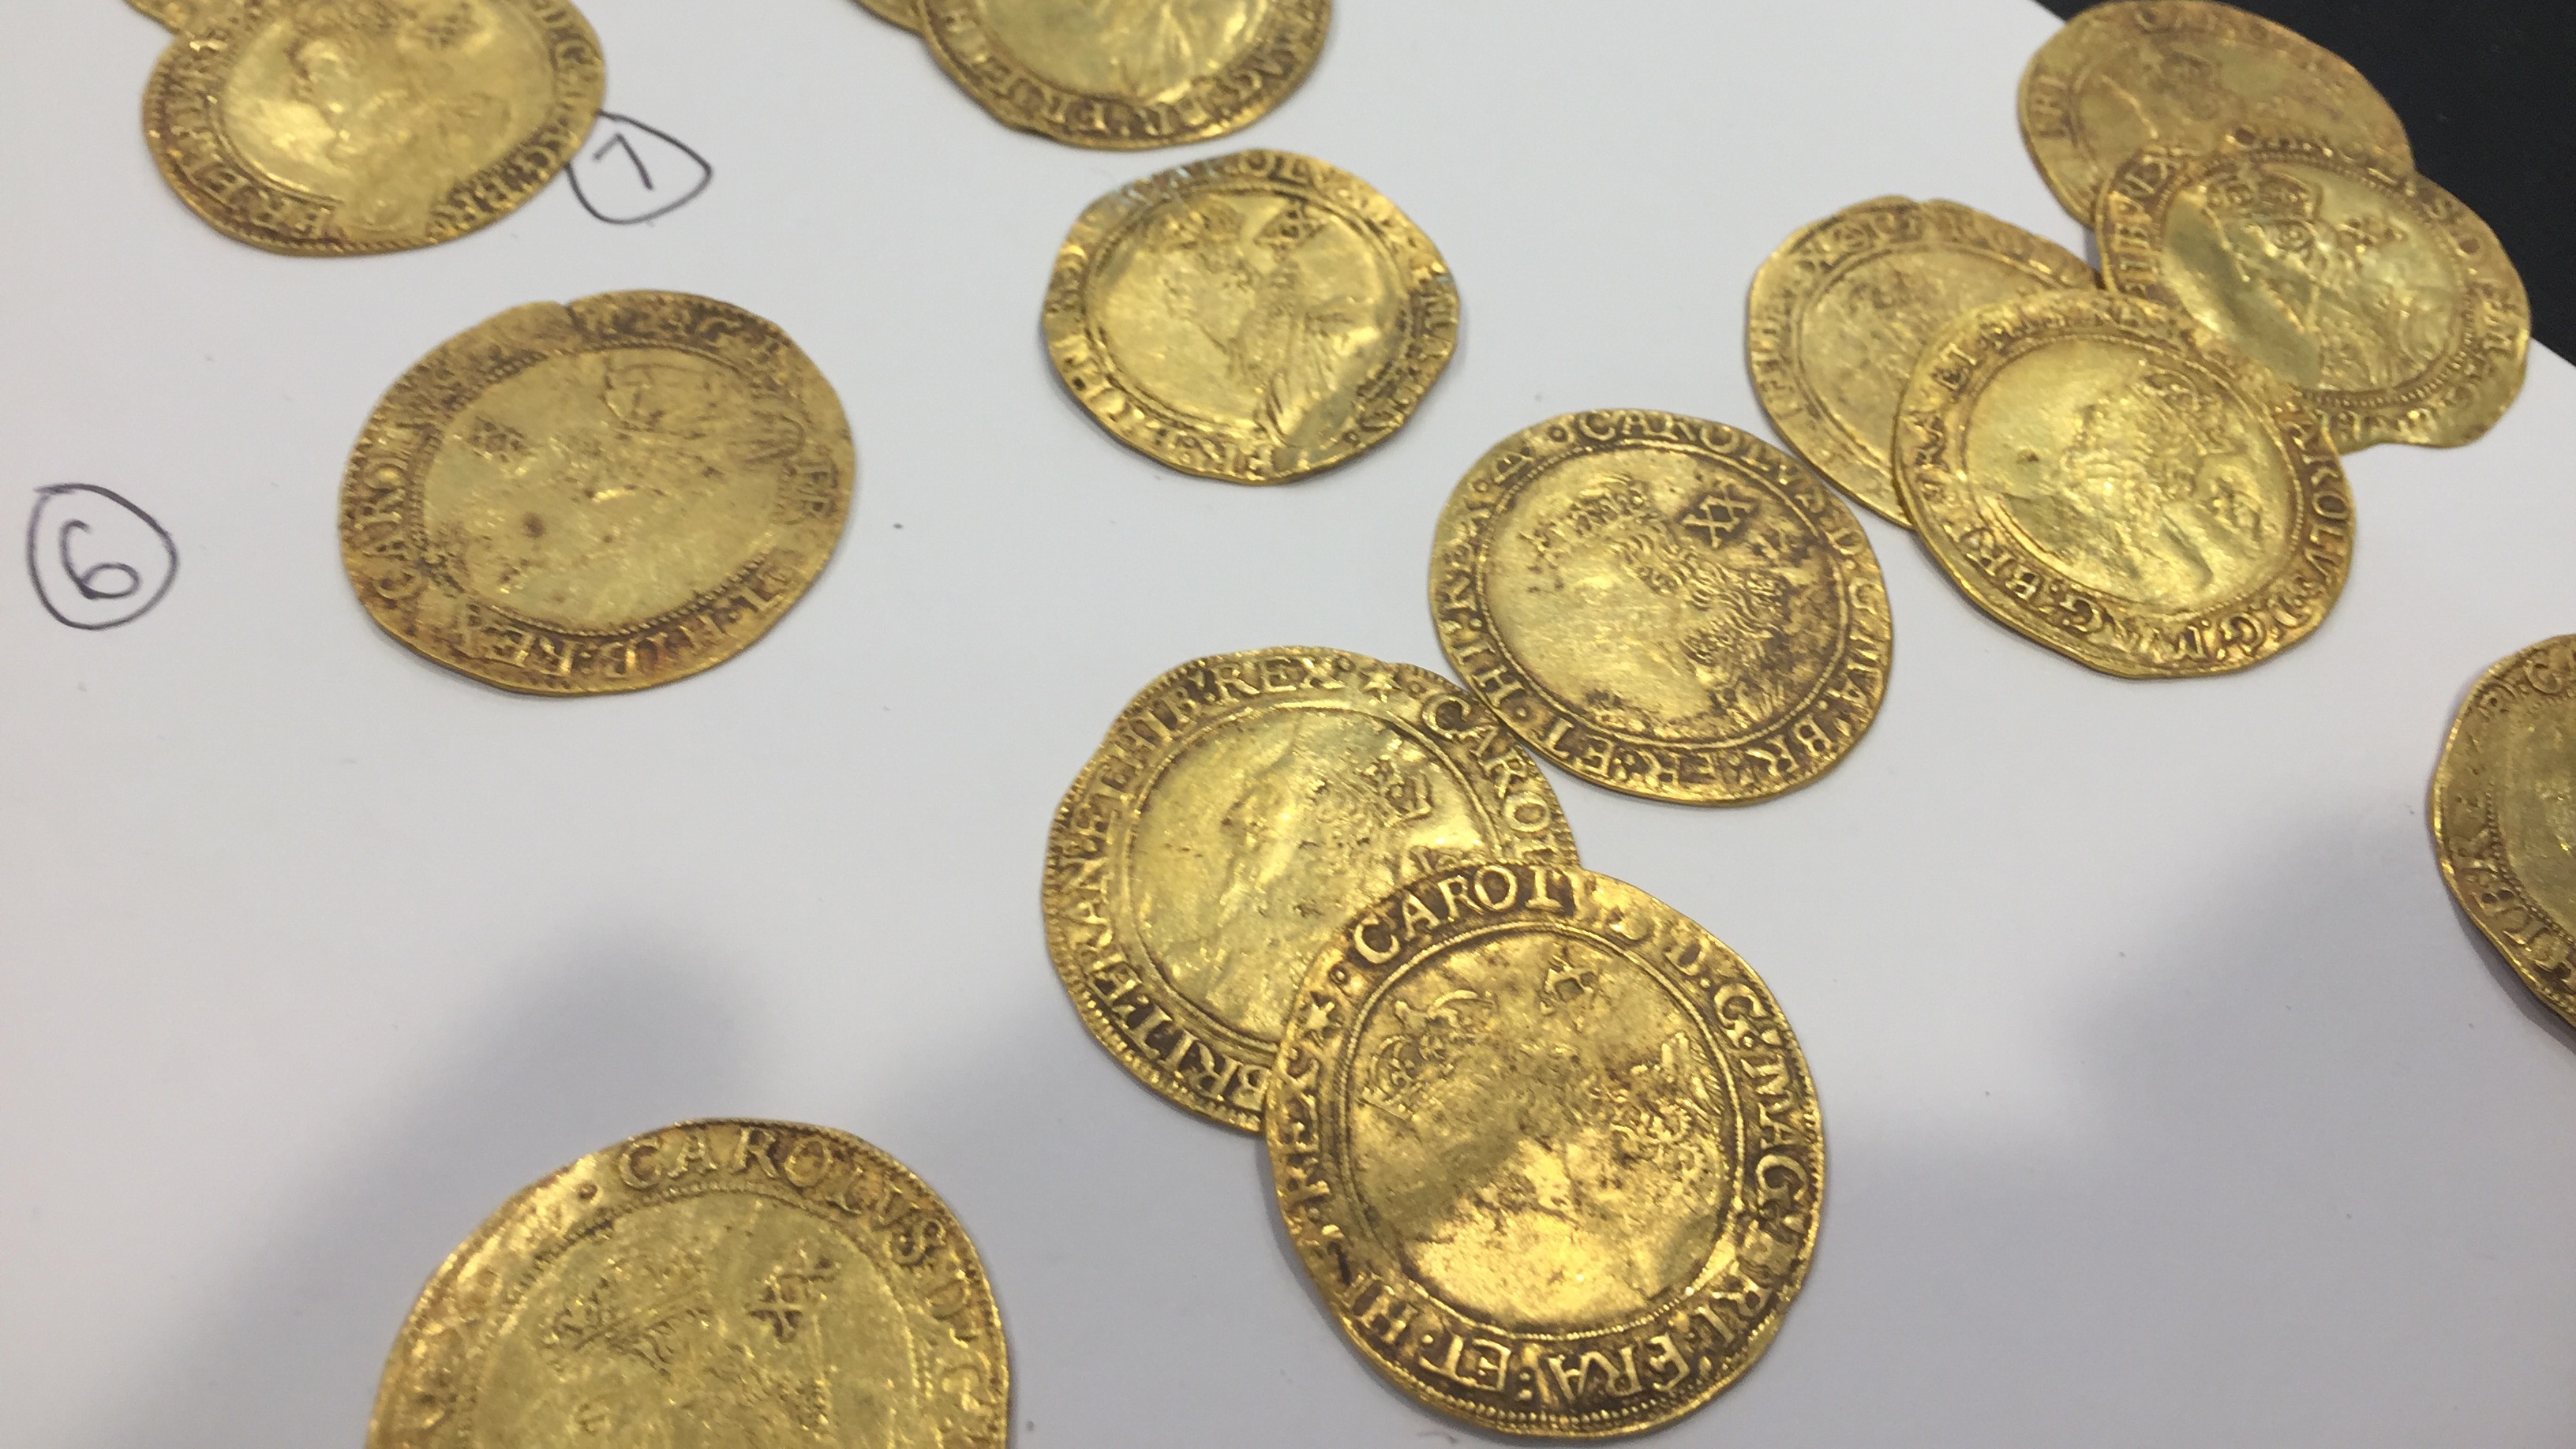 Here we see a group of gold coins against a white background.